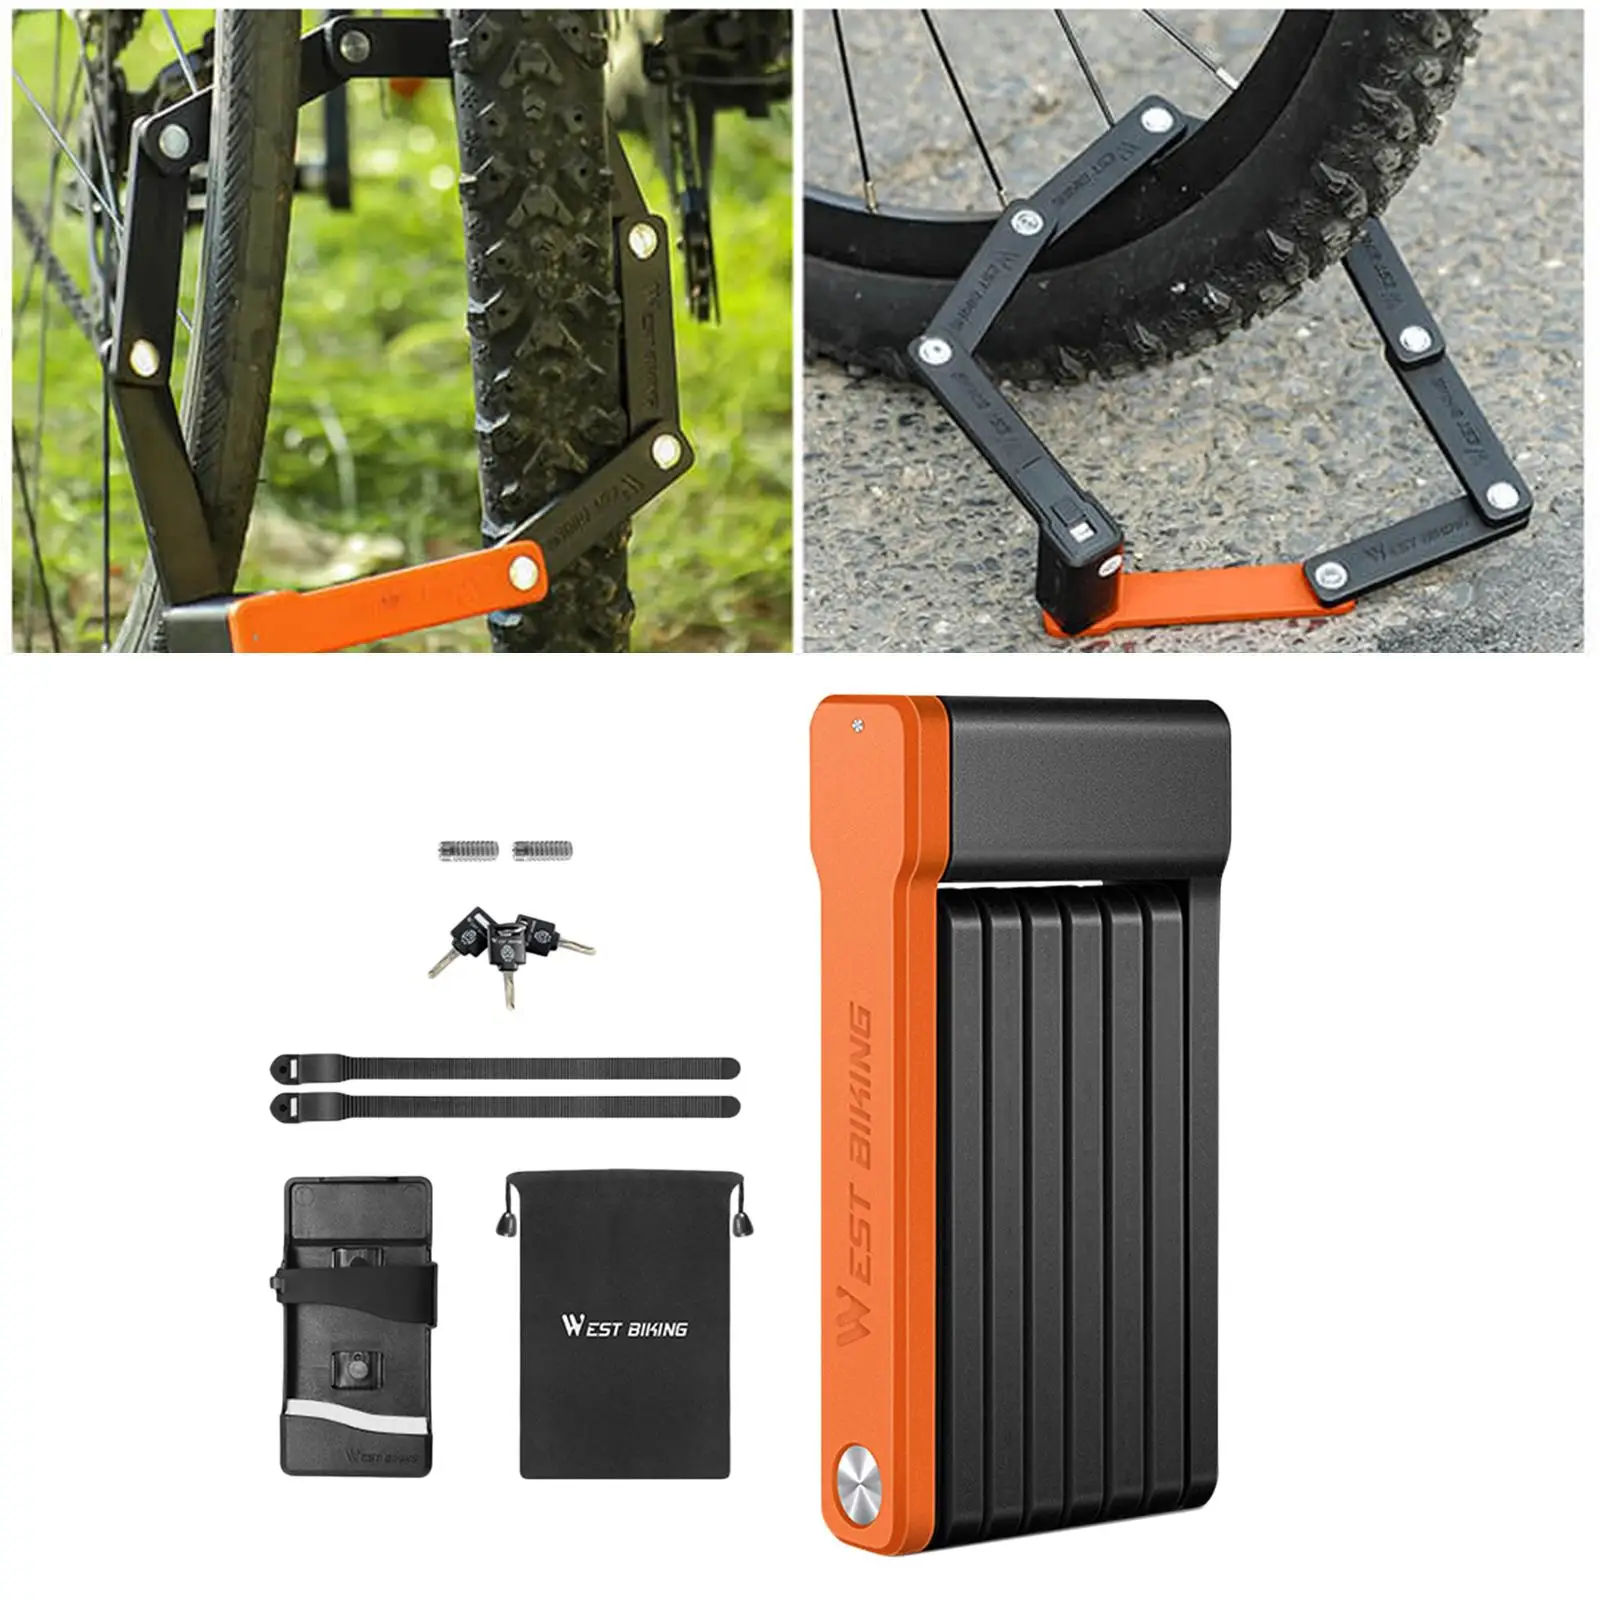 Alloy Folding Combo Bicycle Lock Anti Theft Carrying Case Included with 3 Keys , 63cm Bike Locking Chain for Motorcycle Ebike